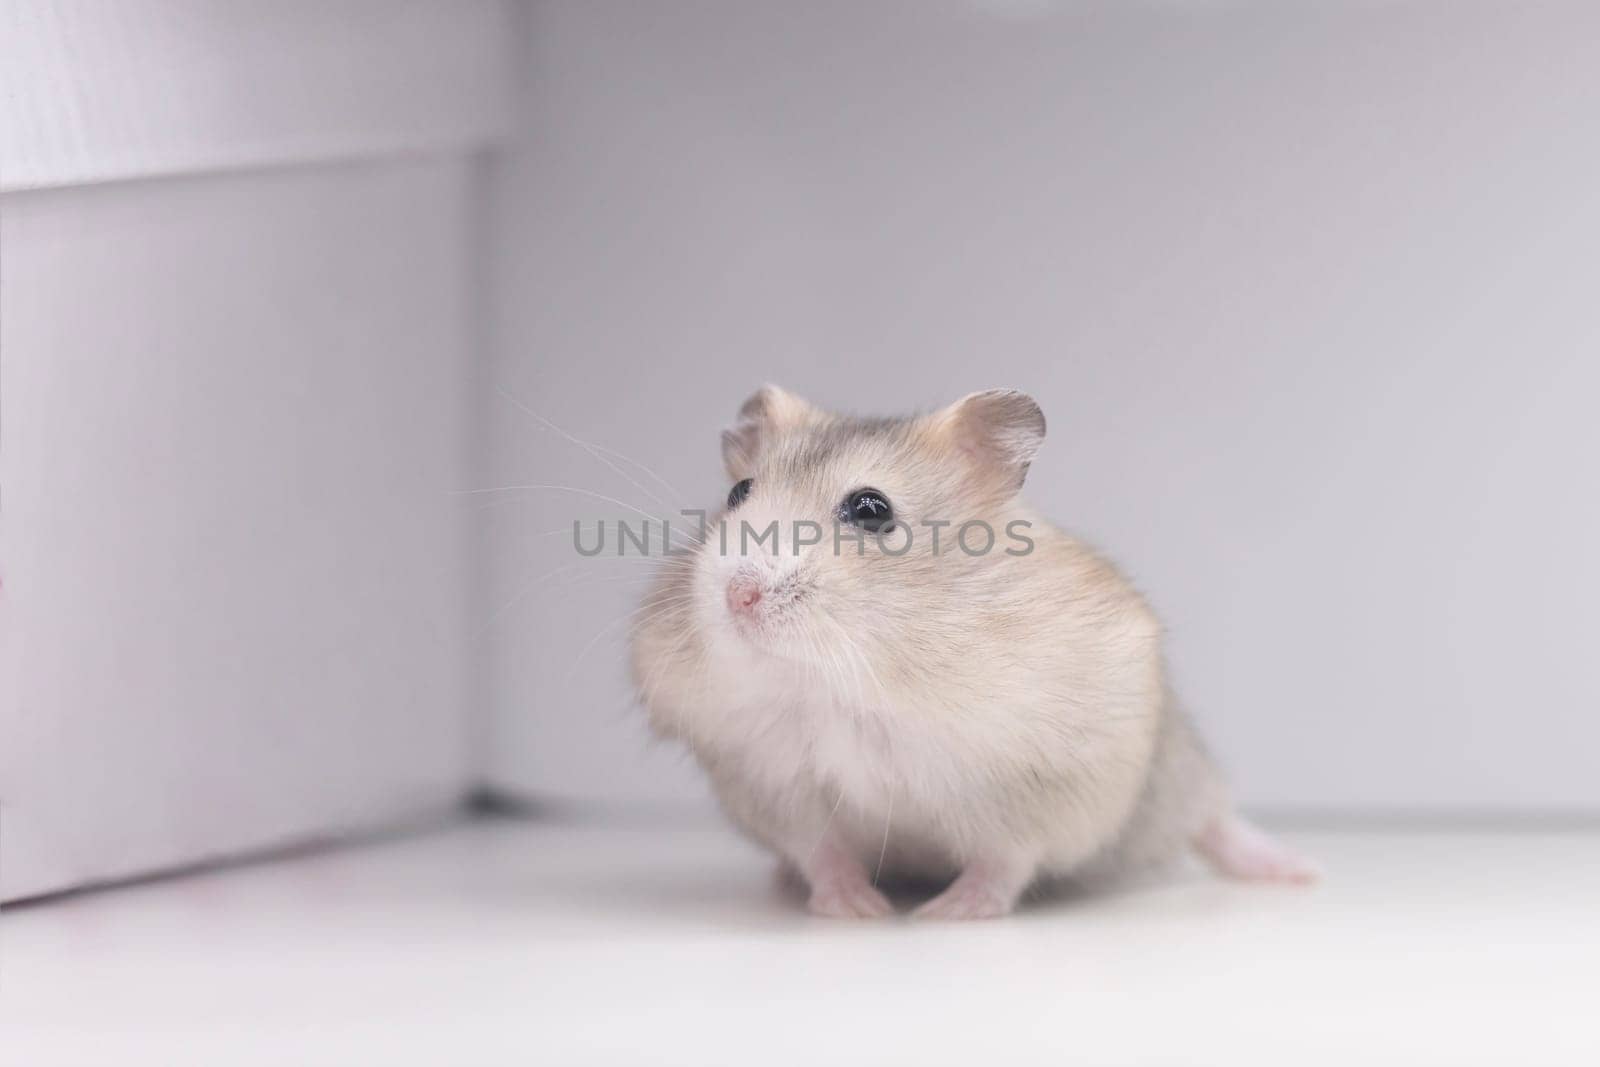 peach hamster looking up on a white background by drakuliren